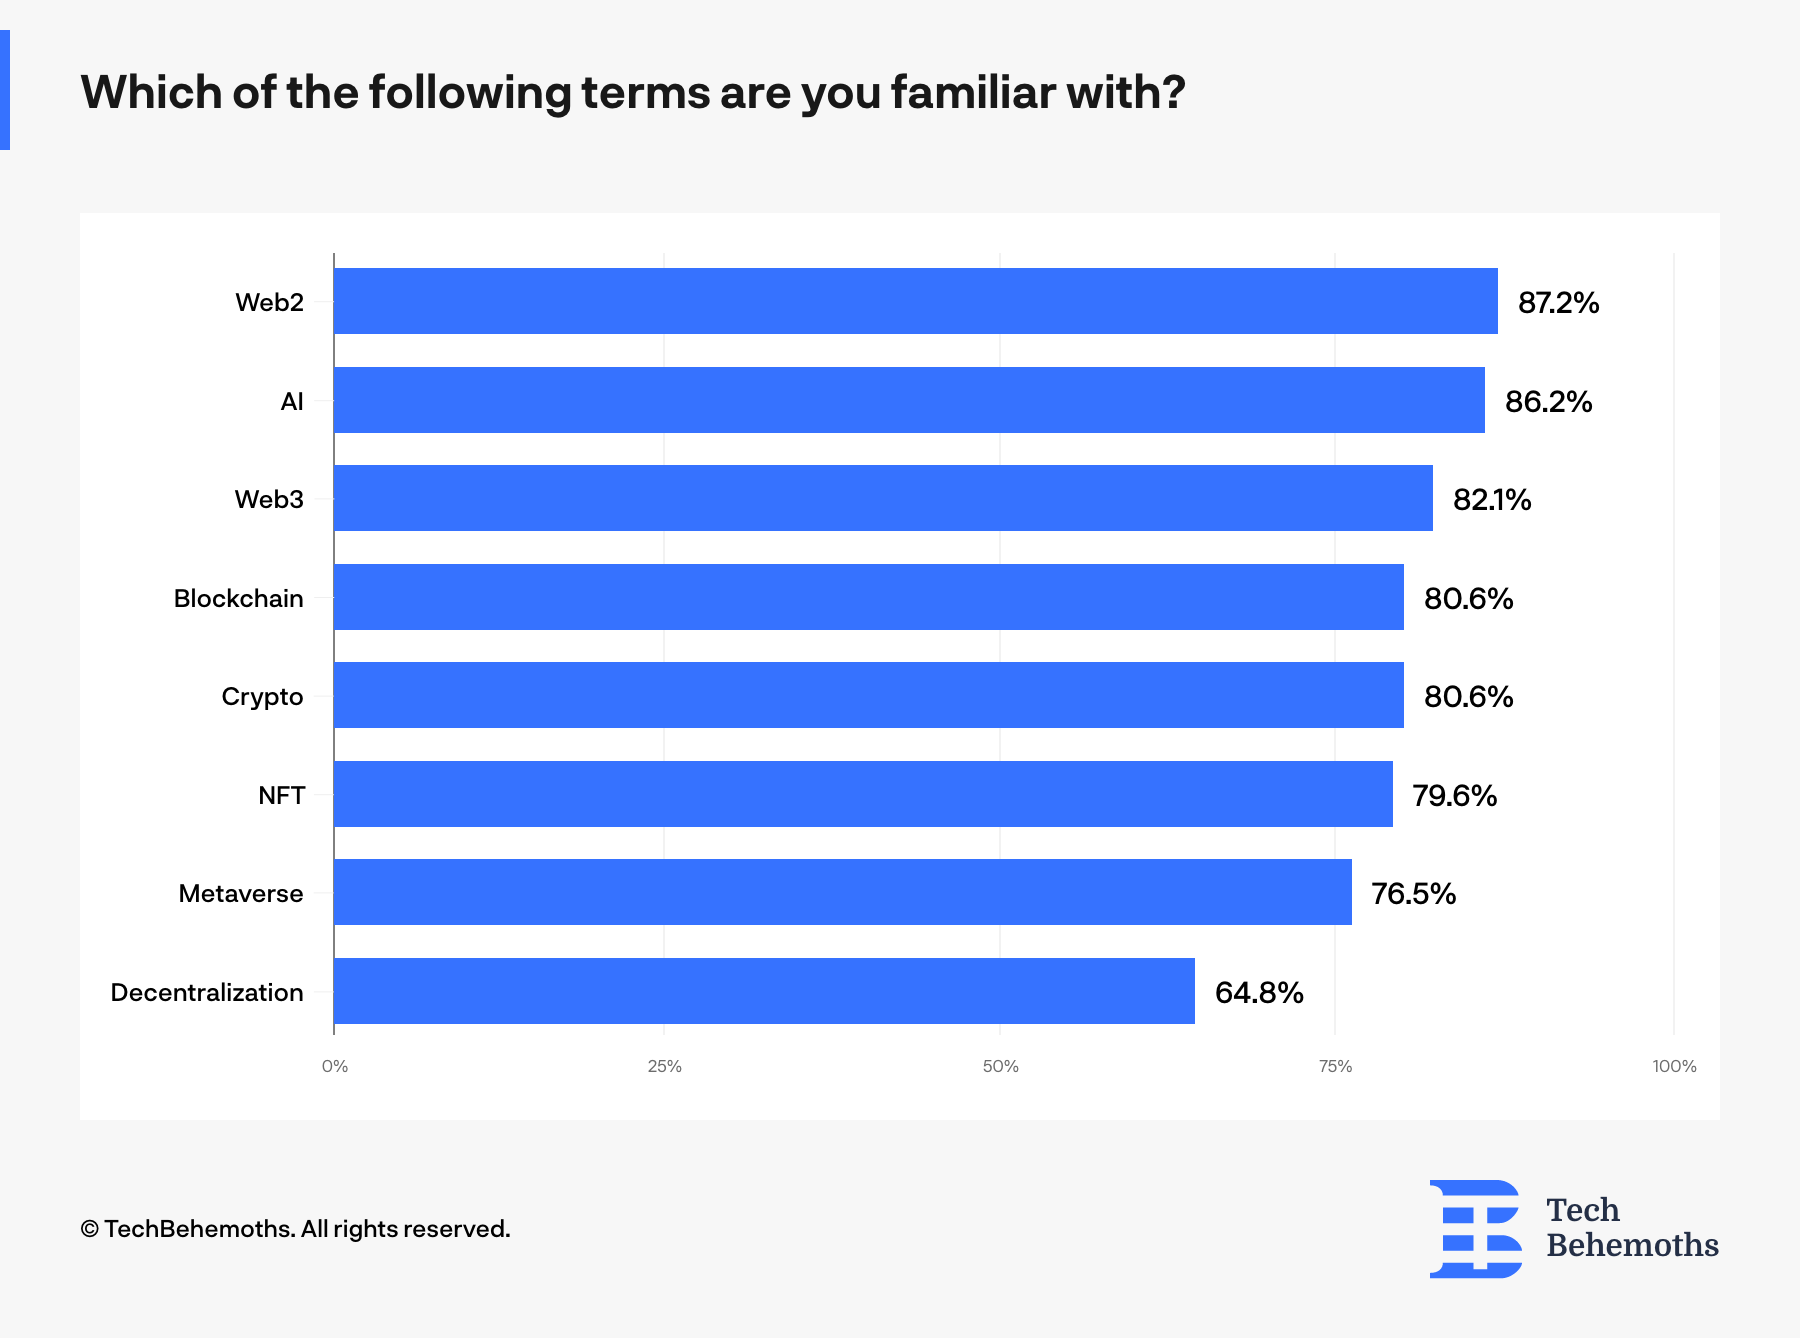 The web3 terms survey respondents are familiar with